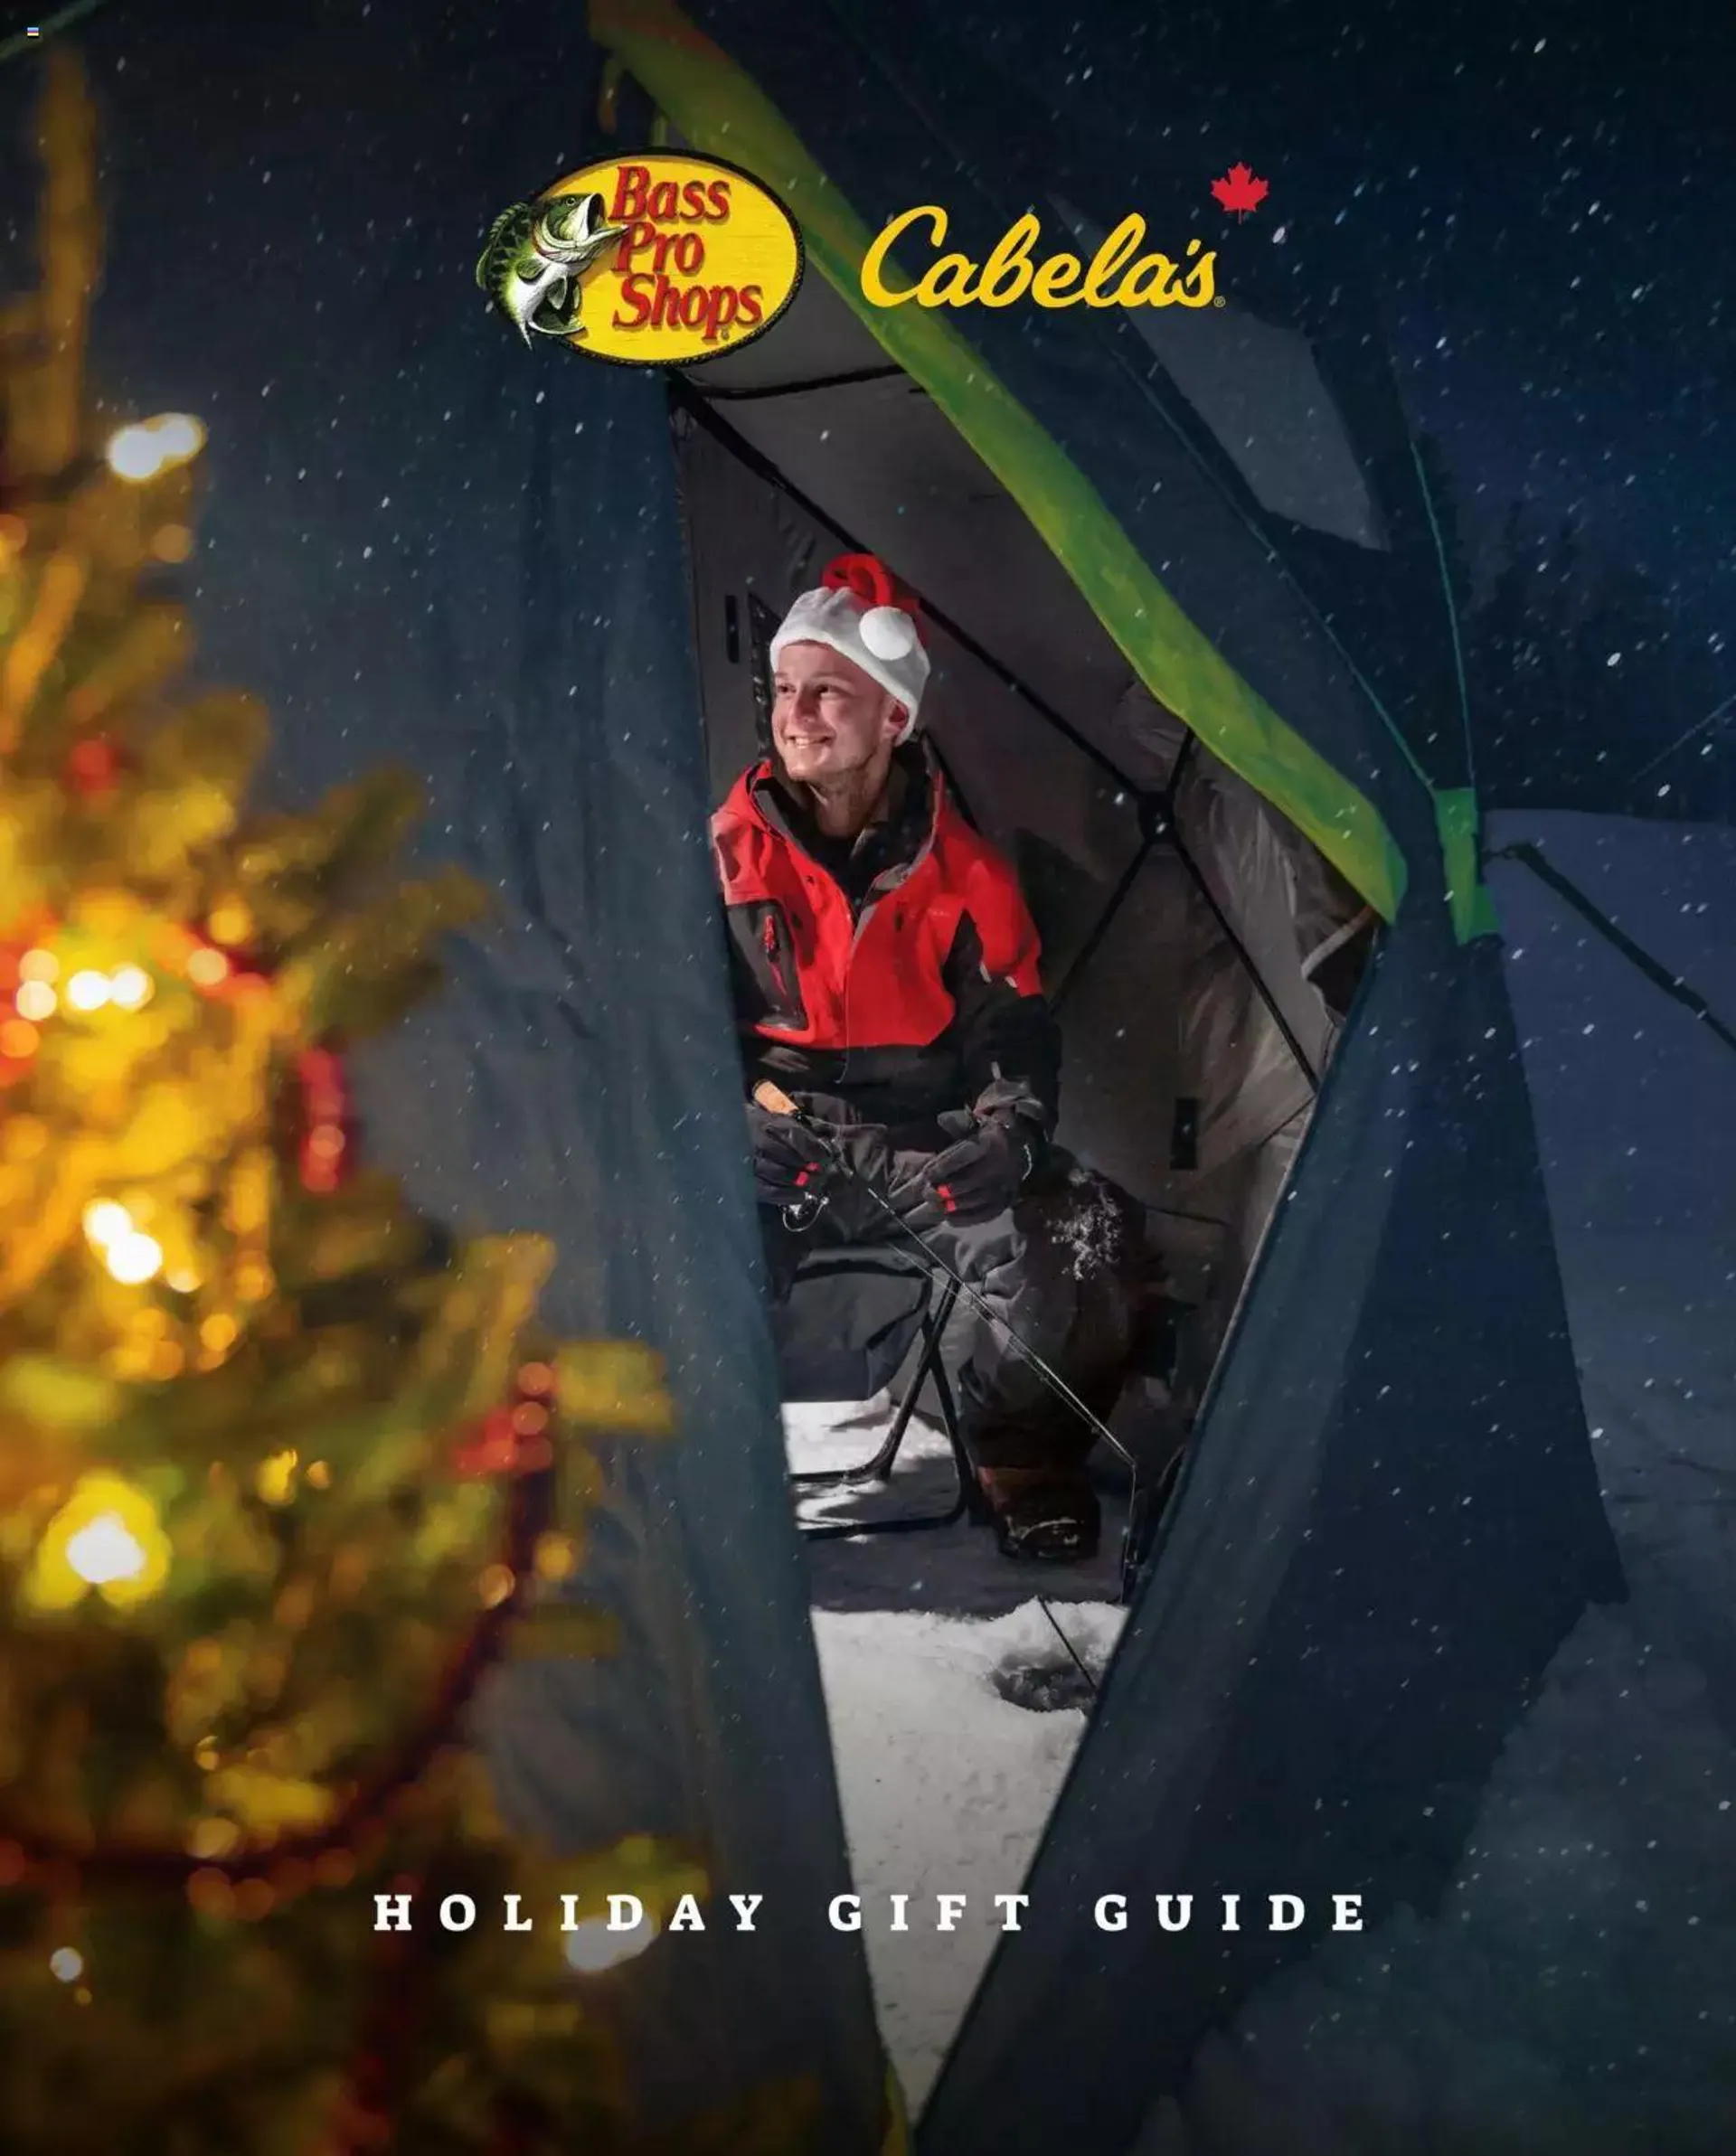 Cabelas - Holiday Gift Guide - 0